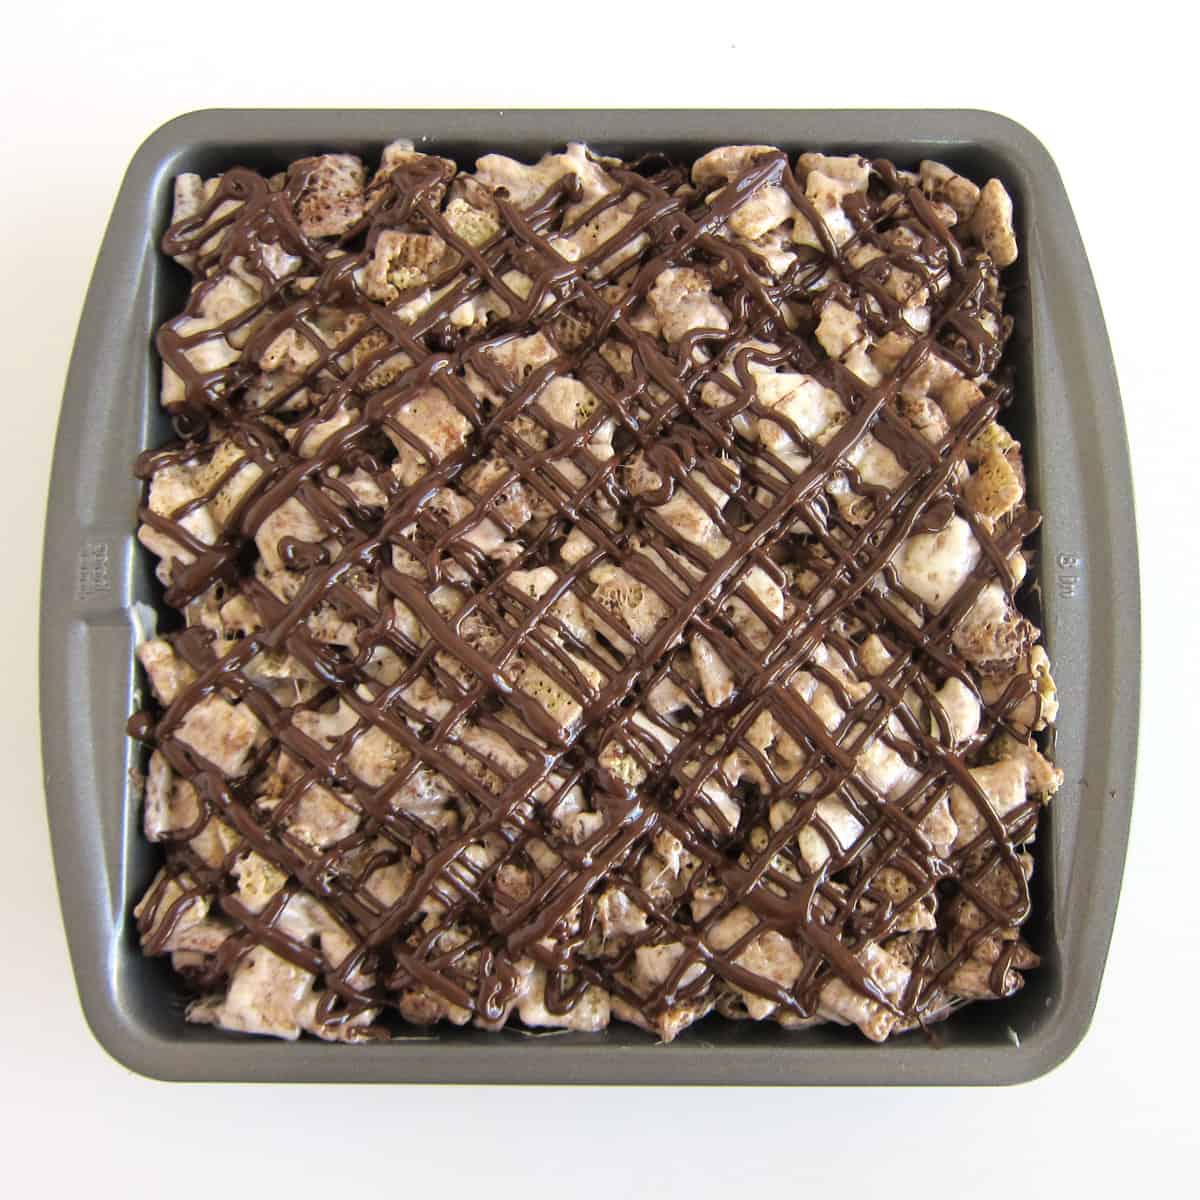 chocolate drizzled over the chex bars in an 8-inch pan